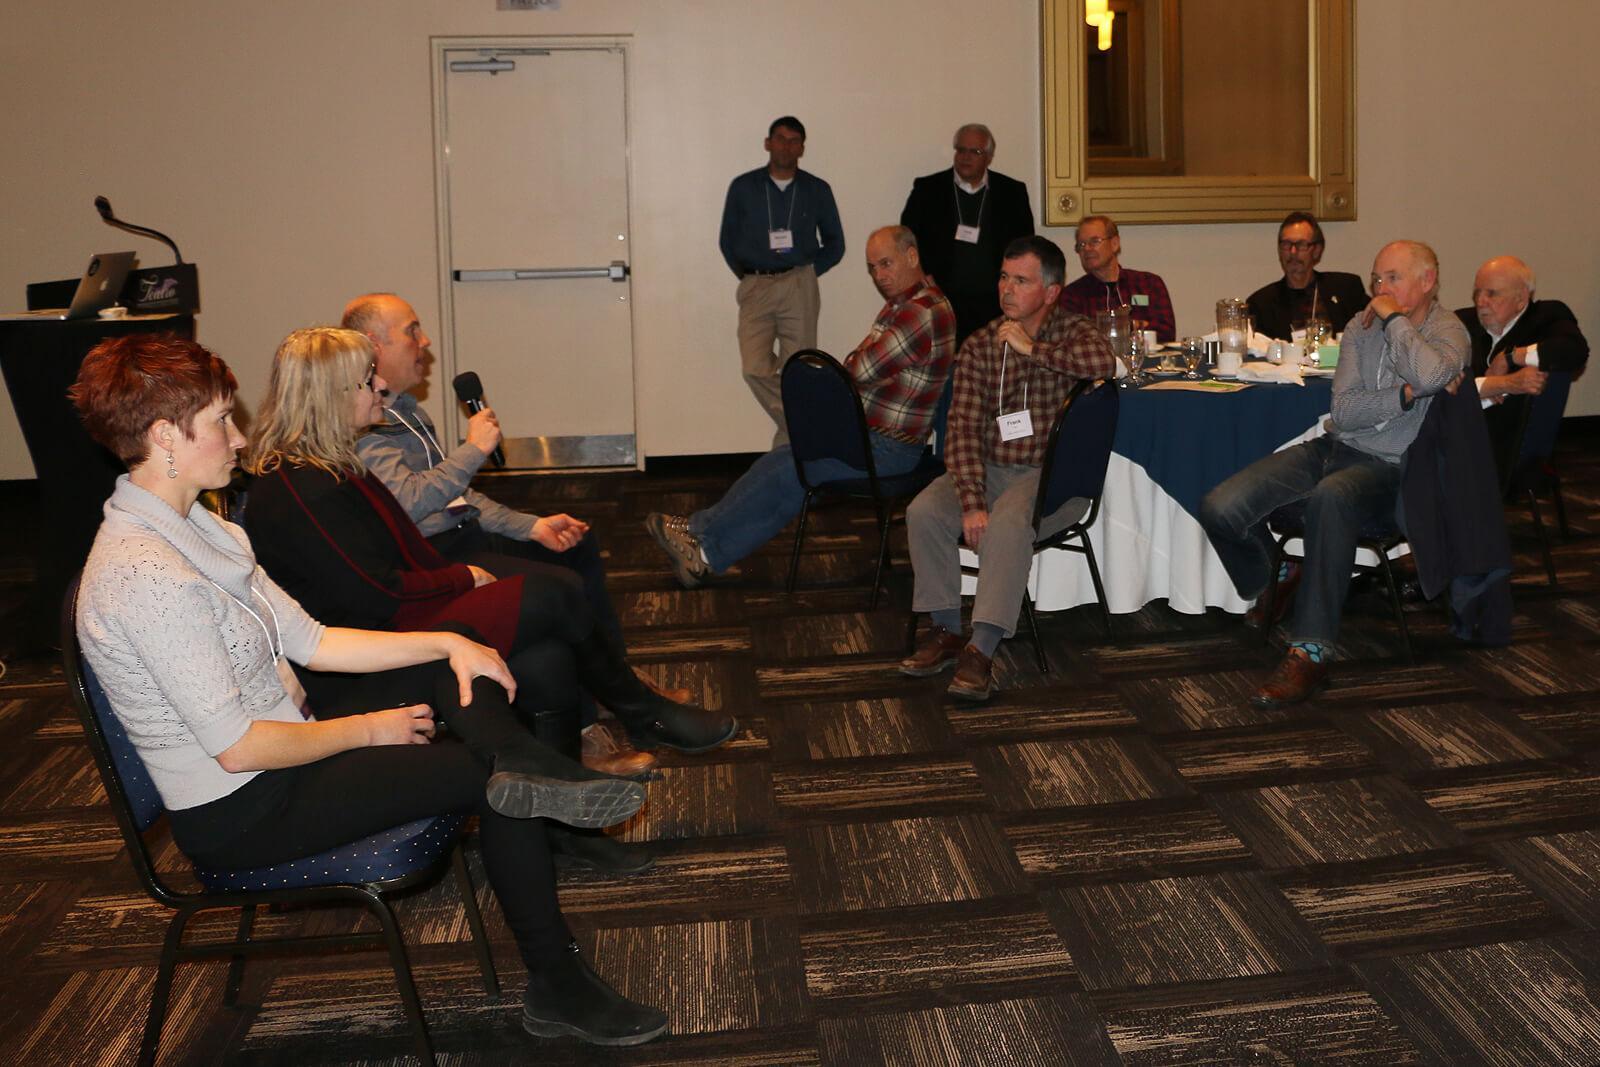 After the presentations, growers took the opportunity to discuss policies and factors that affect their business operations.